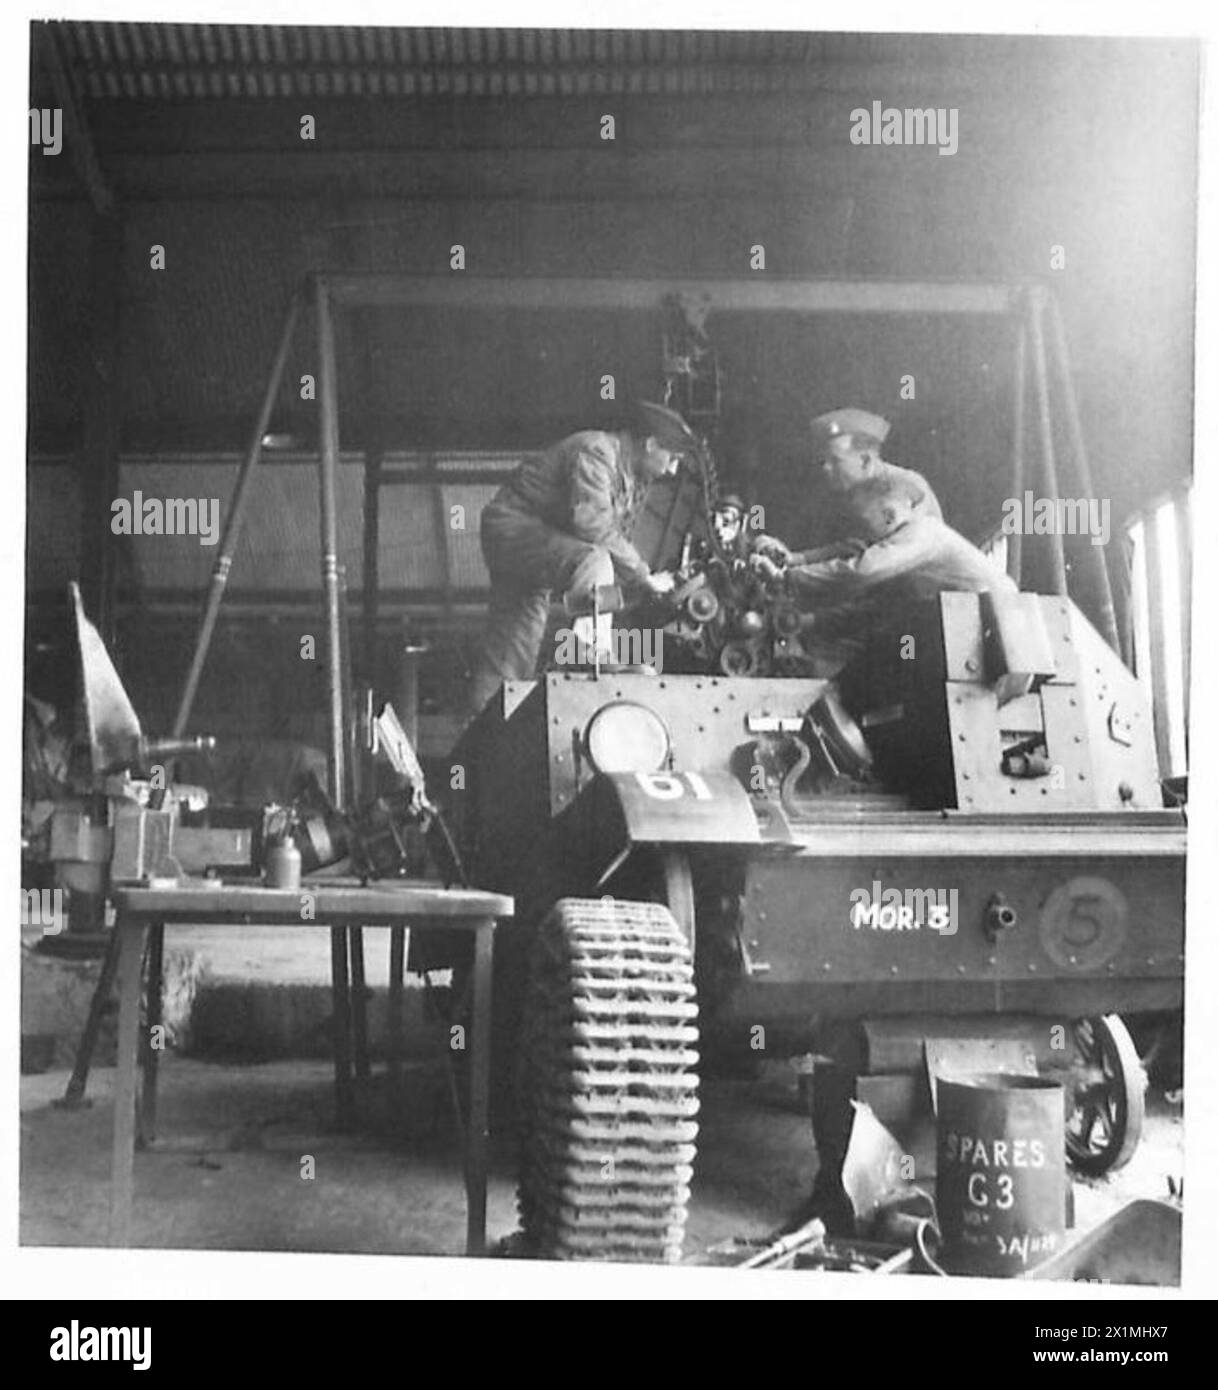 THE ACTIVITIES OF THE ROYAL ELECTRICAL AND MECHANICAL ENGINEERS - Putting an engine into a Bren carrier. Left to right - Craftsman Erselius of Holloway, London, was a truck driver. L/Cpl. H. Roberts of Northwich, Cheshire a grocery salesman. Sgt. W. Wallis of New Malden, Surrey a Stores Manager, British Army Stock Photo